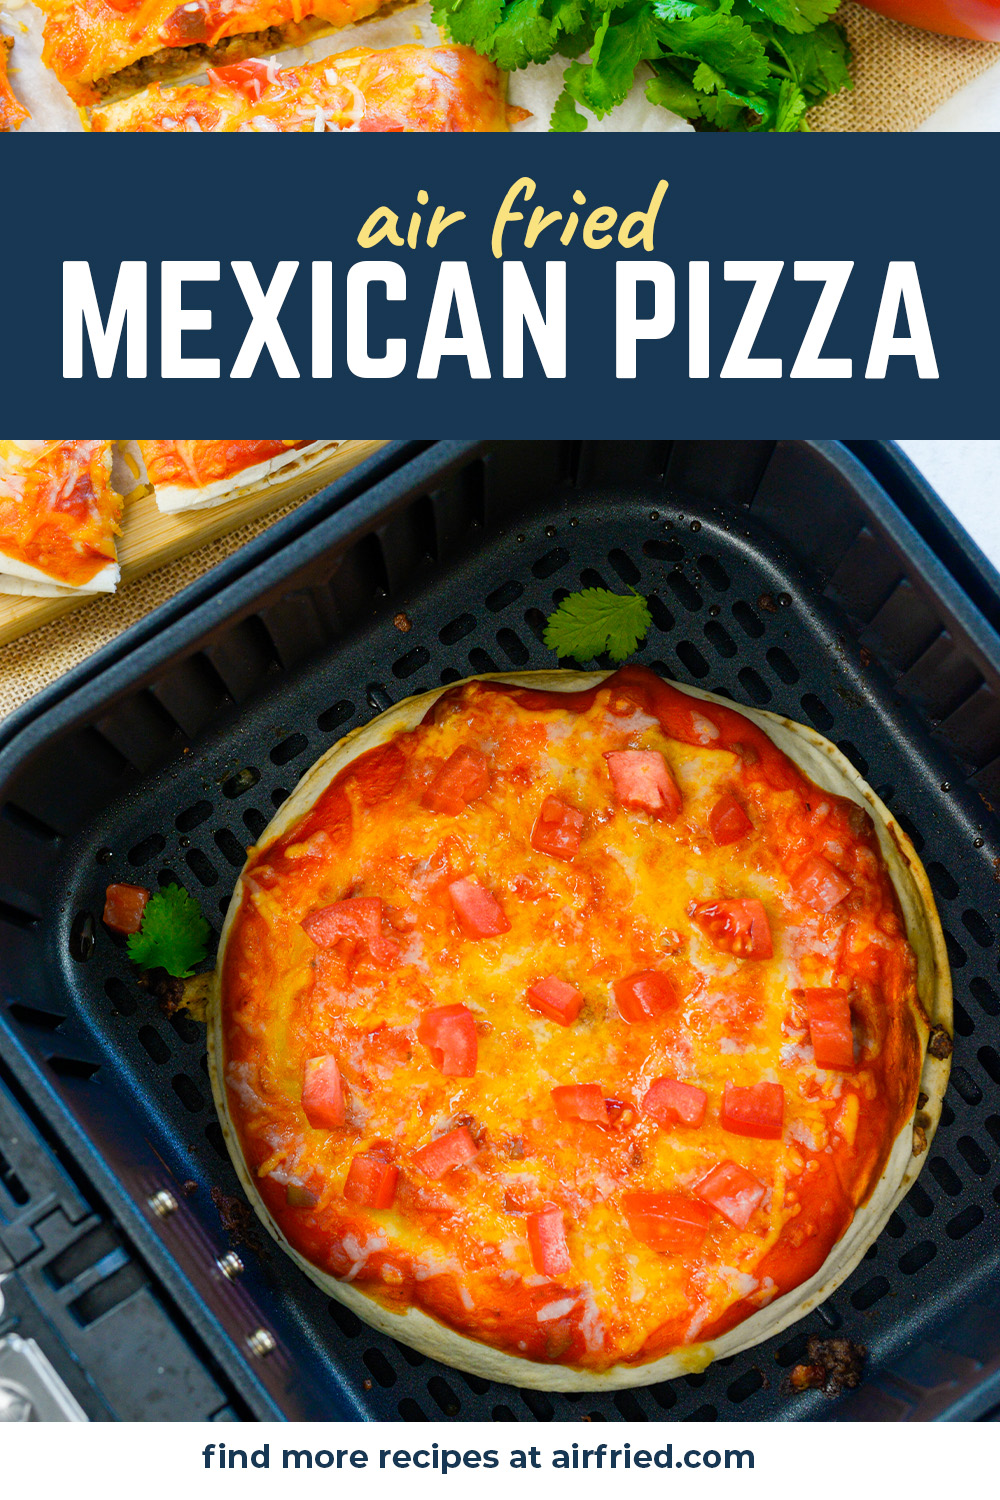 This air fryer Mexican pizza is a fully customizable version of the popular Taco Bell item.  Really simple to make, and the best part is you can add your own toppings!